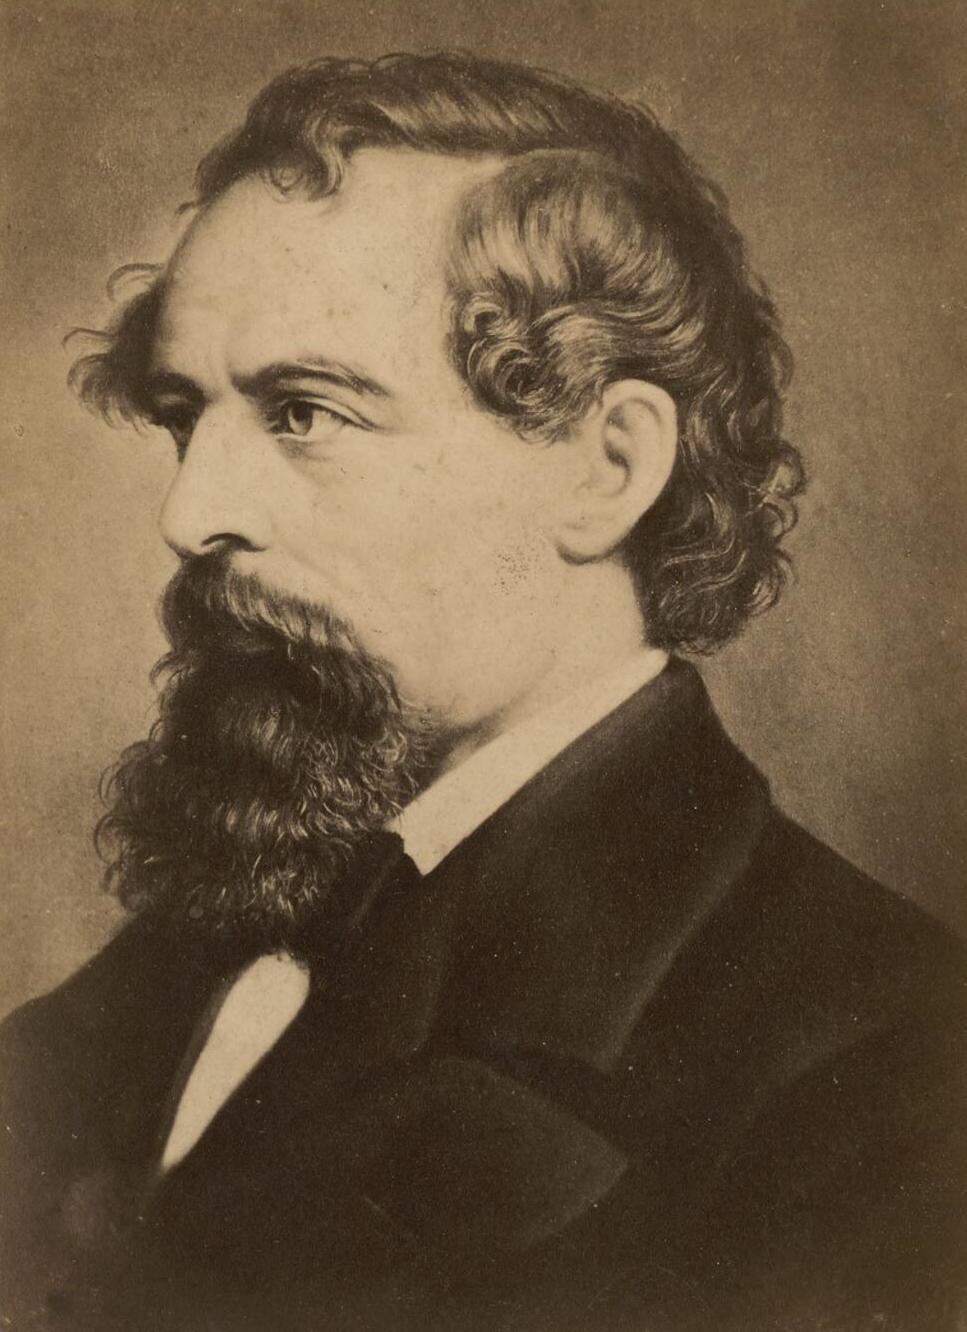 Photo portrait of Charles Dickens